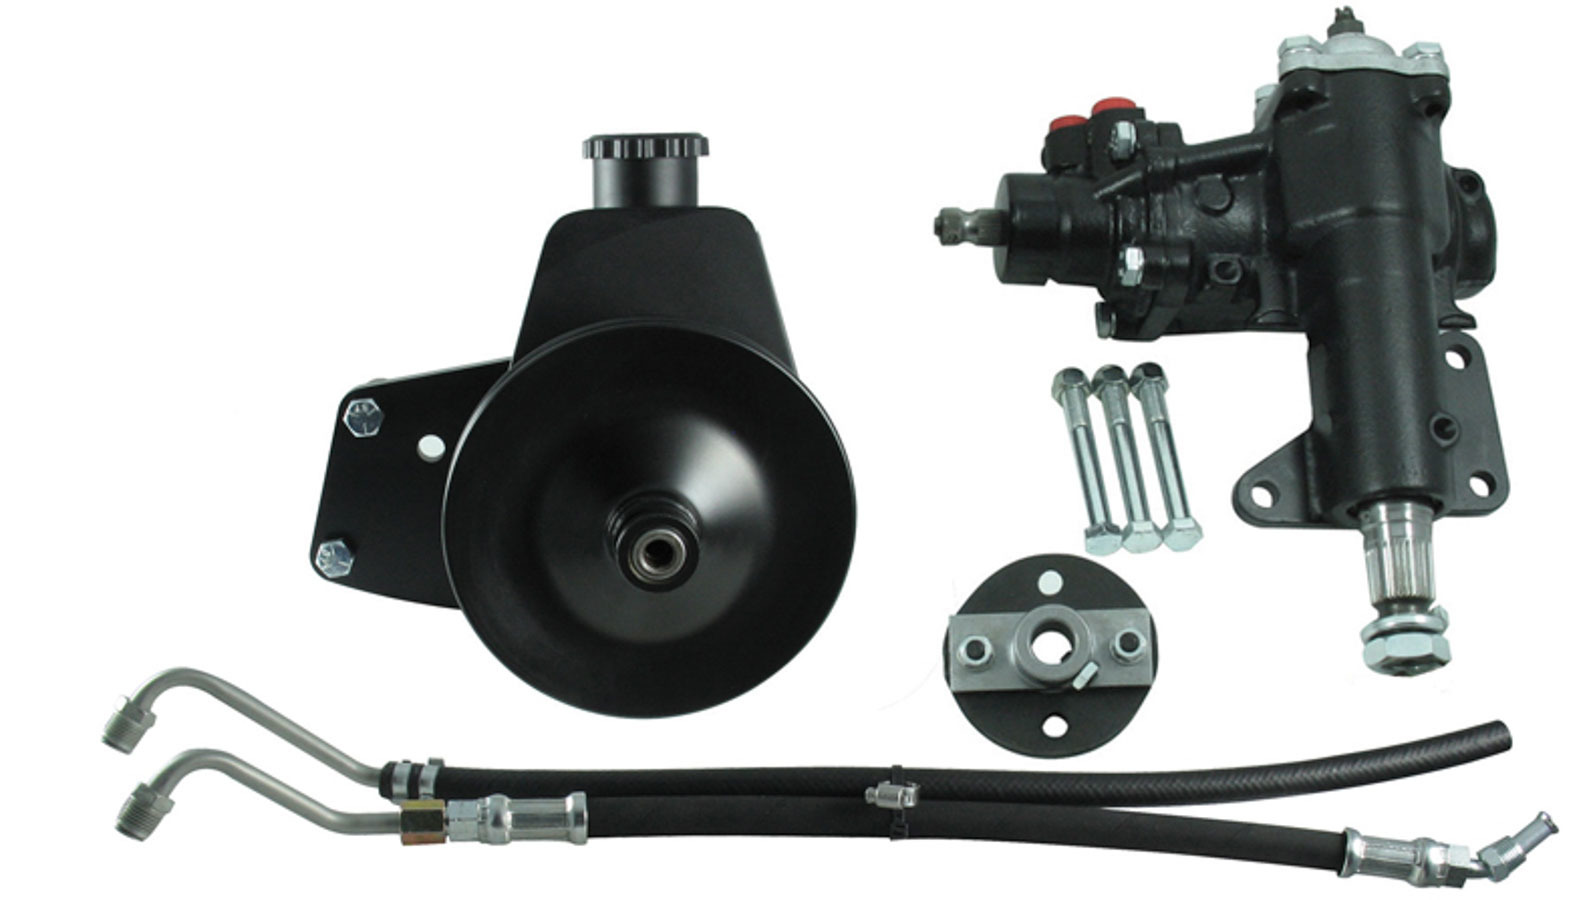 Borgeson 999052 Power Steering Conversion Kit